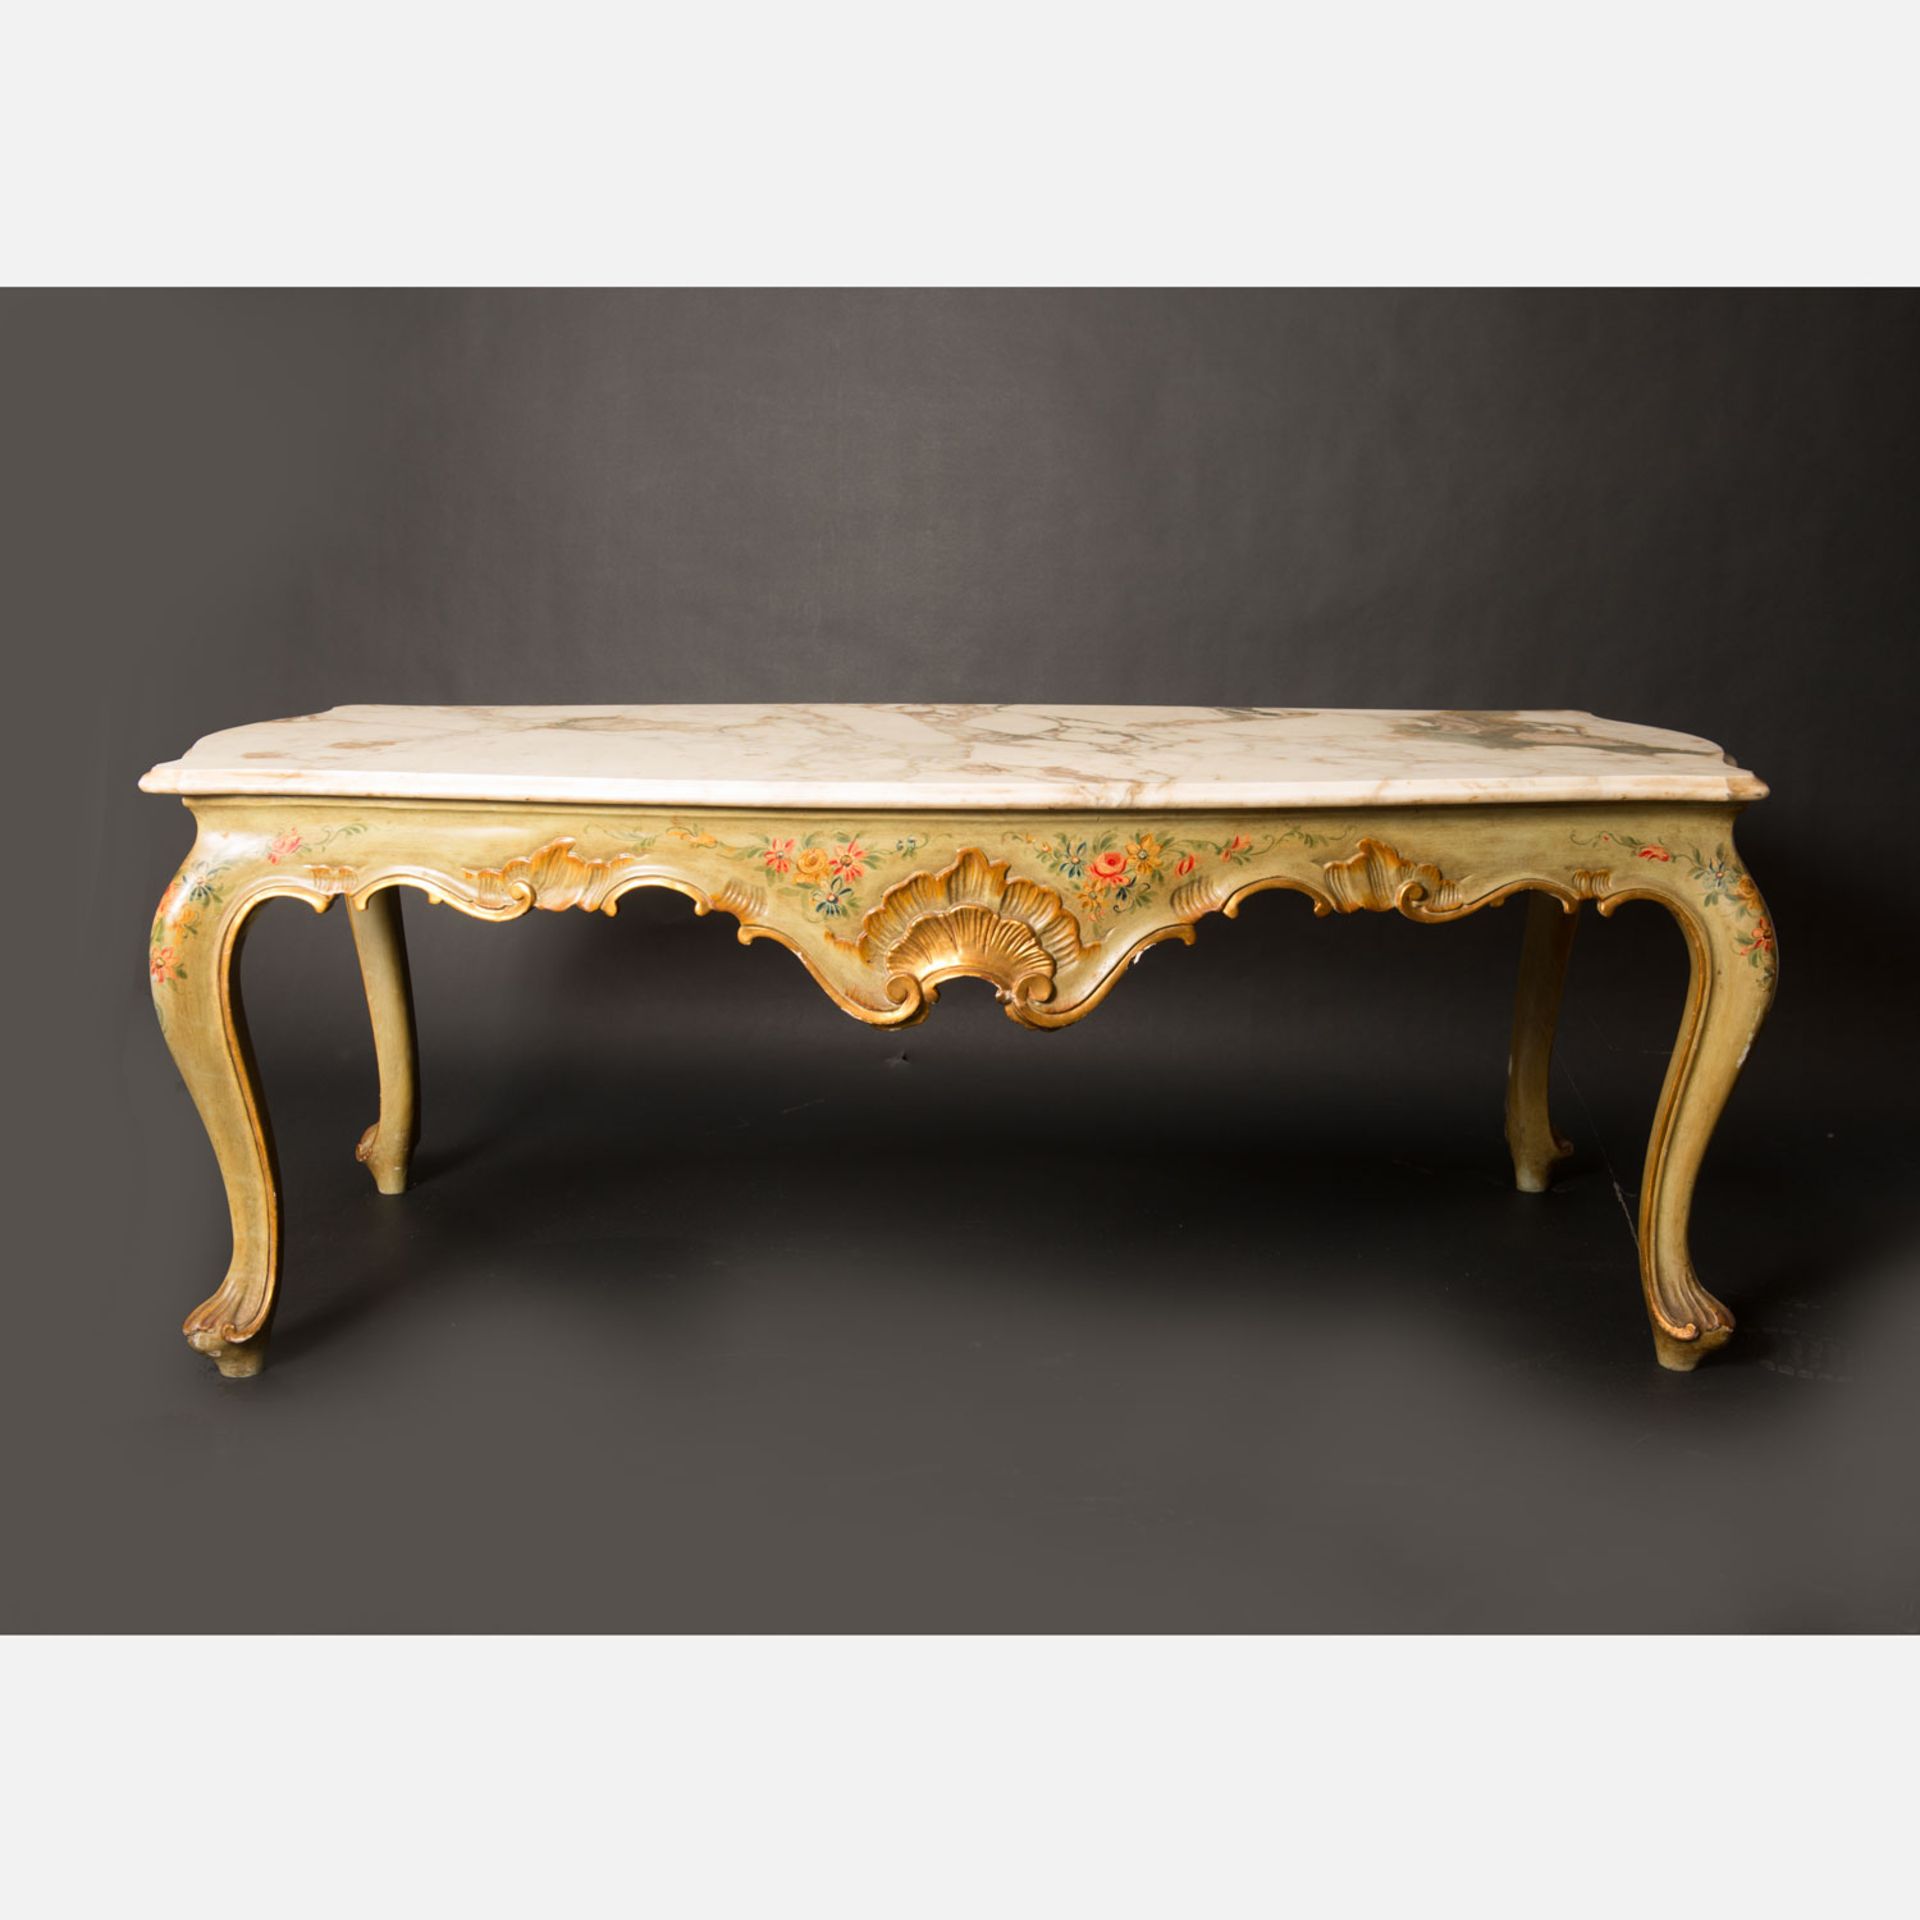 Venetian Sofa Table, in Baroque style, carved ornaments with lacquer decorations, white marble - Image 2 of 3